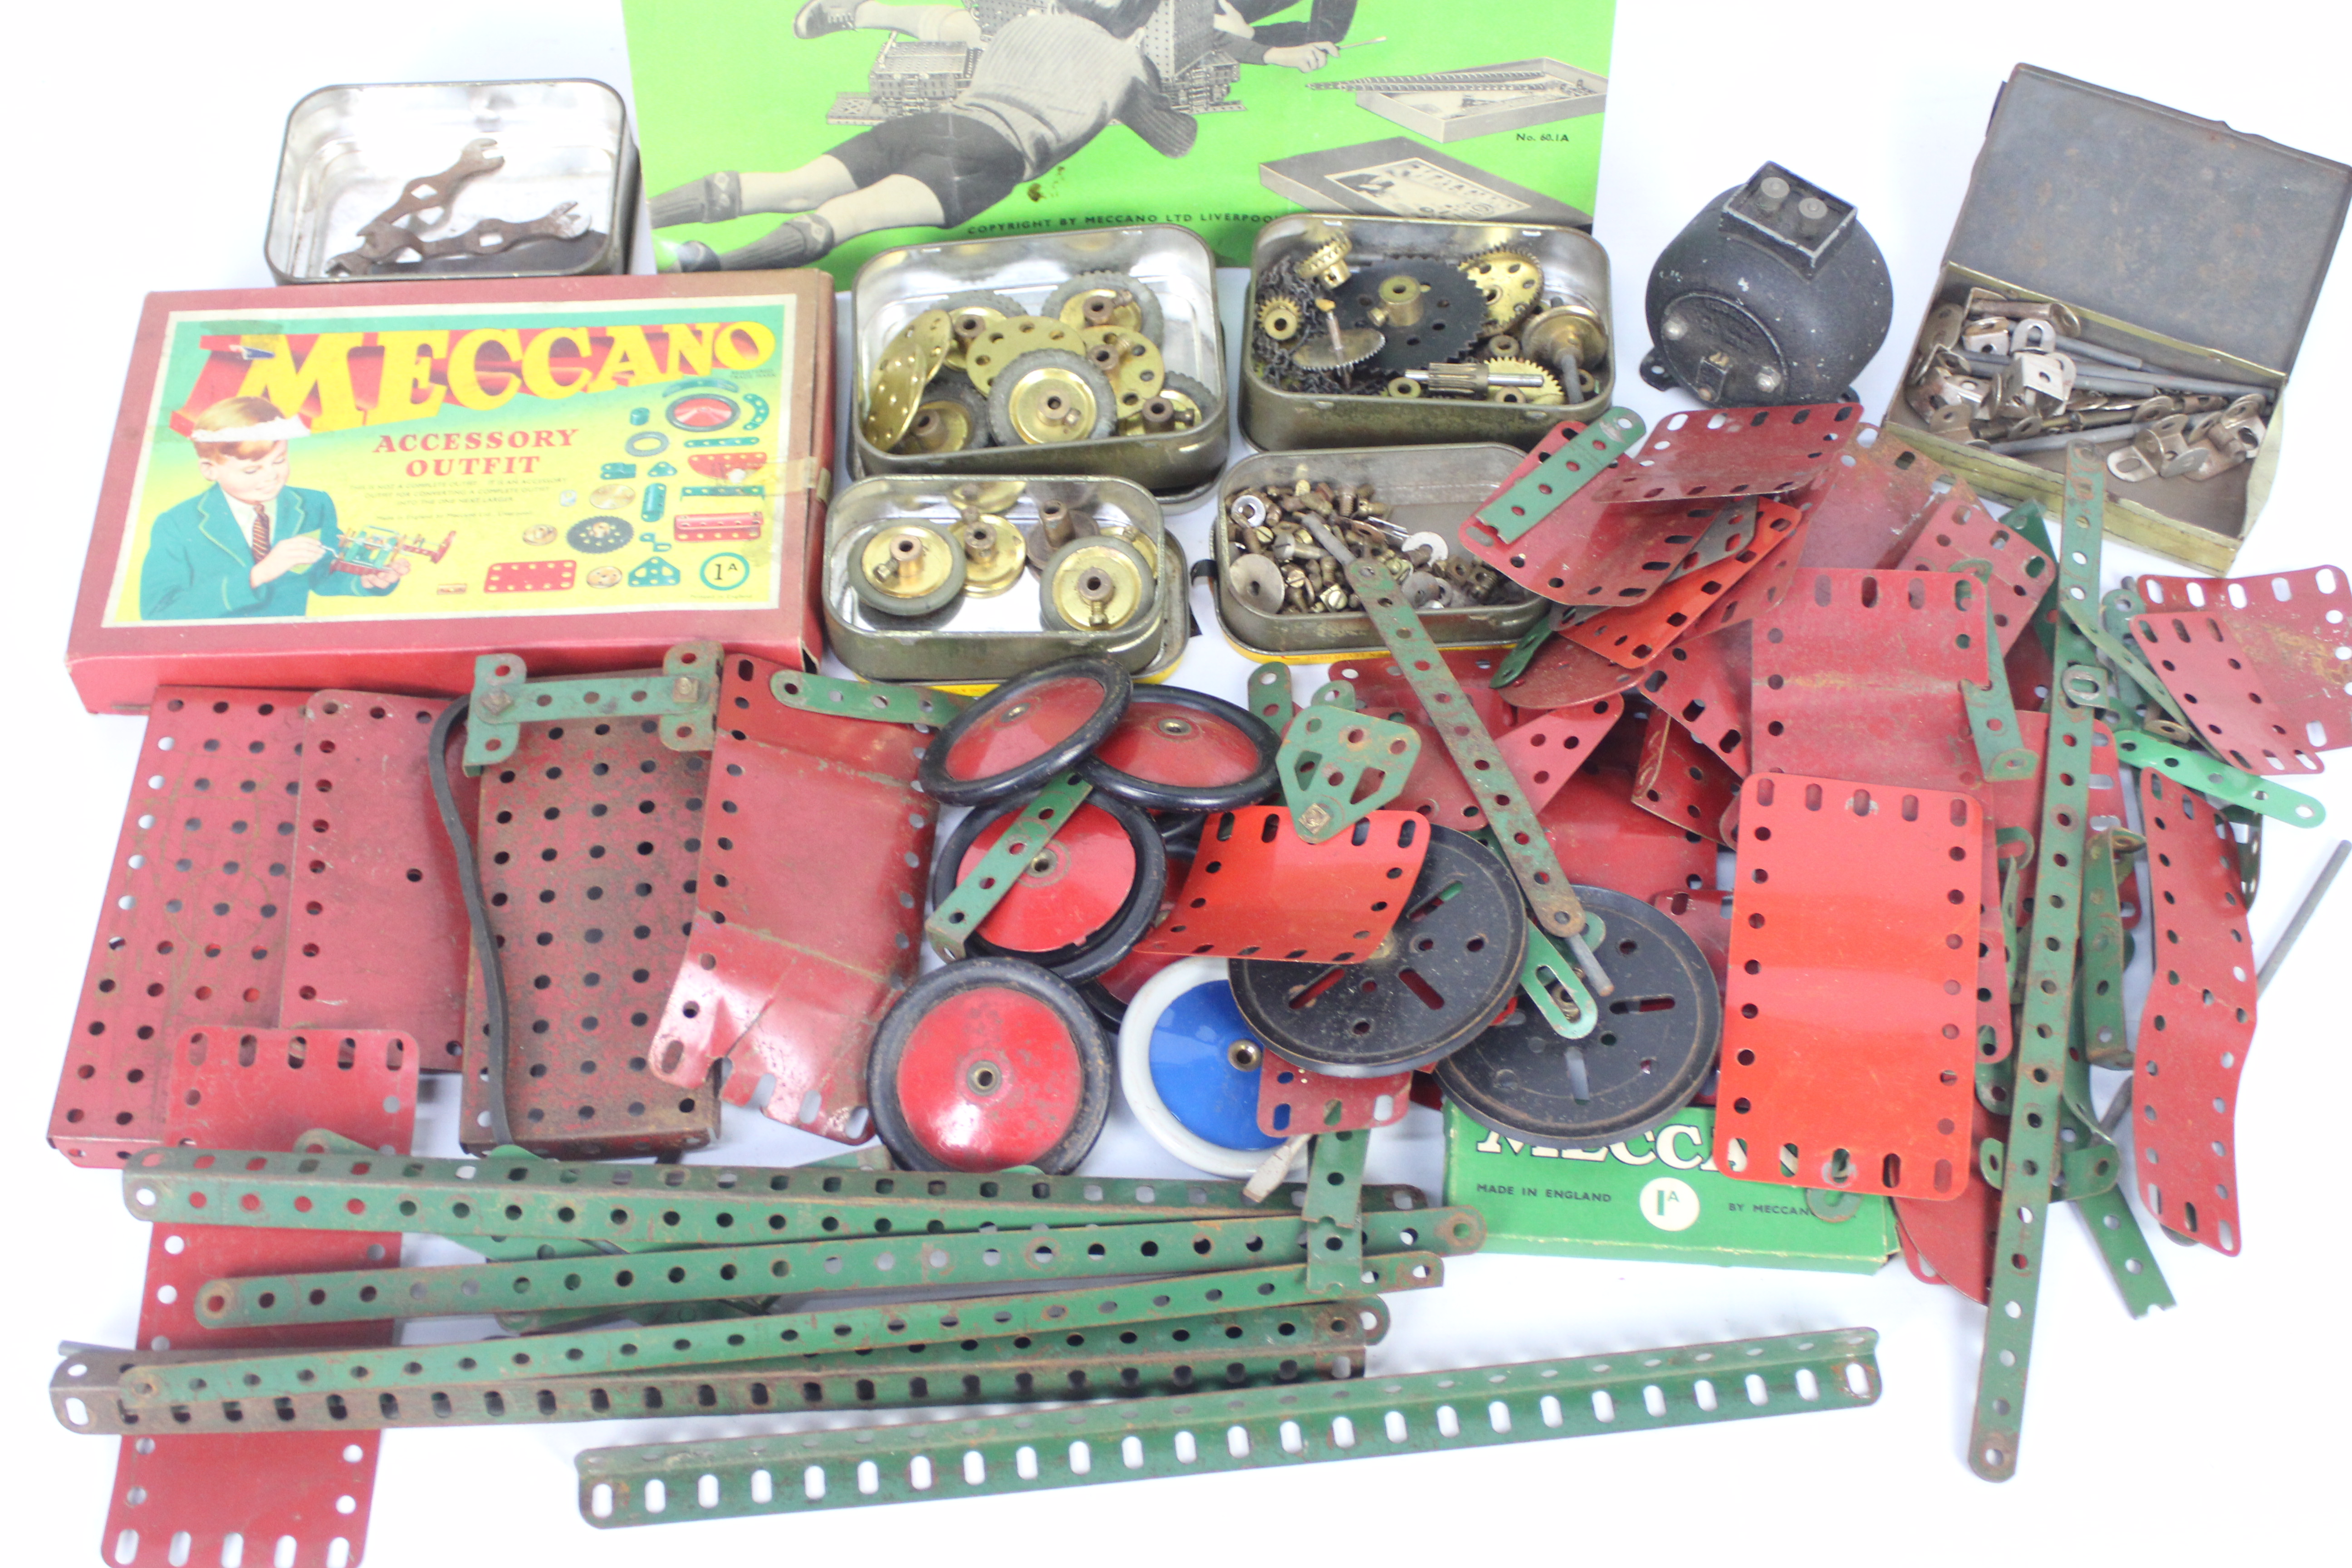 Meccano - A box of assorted Meccano parts including a box and instruction book for Accessory Outfit - Image 2 of 5